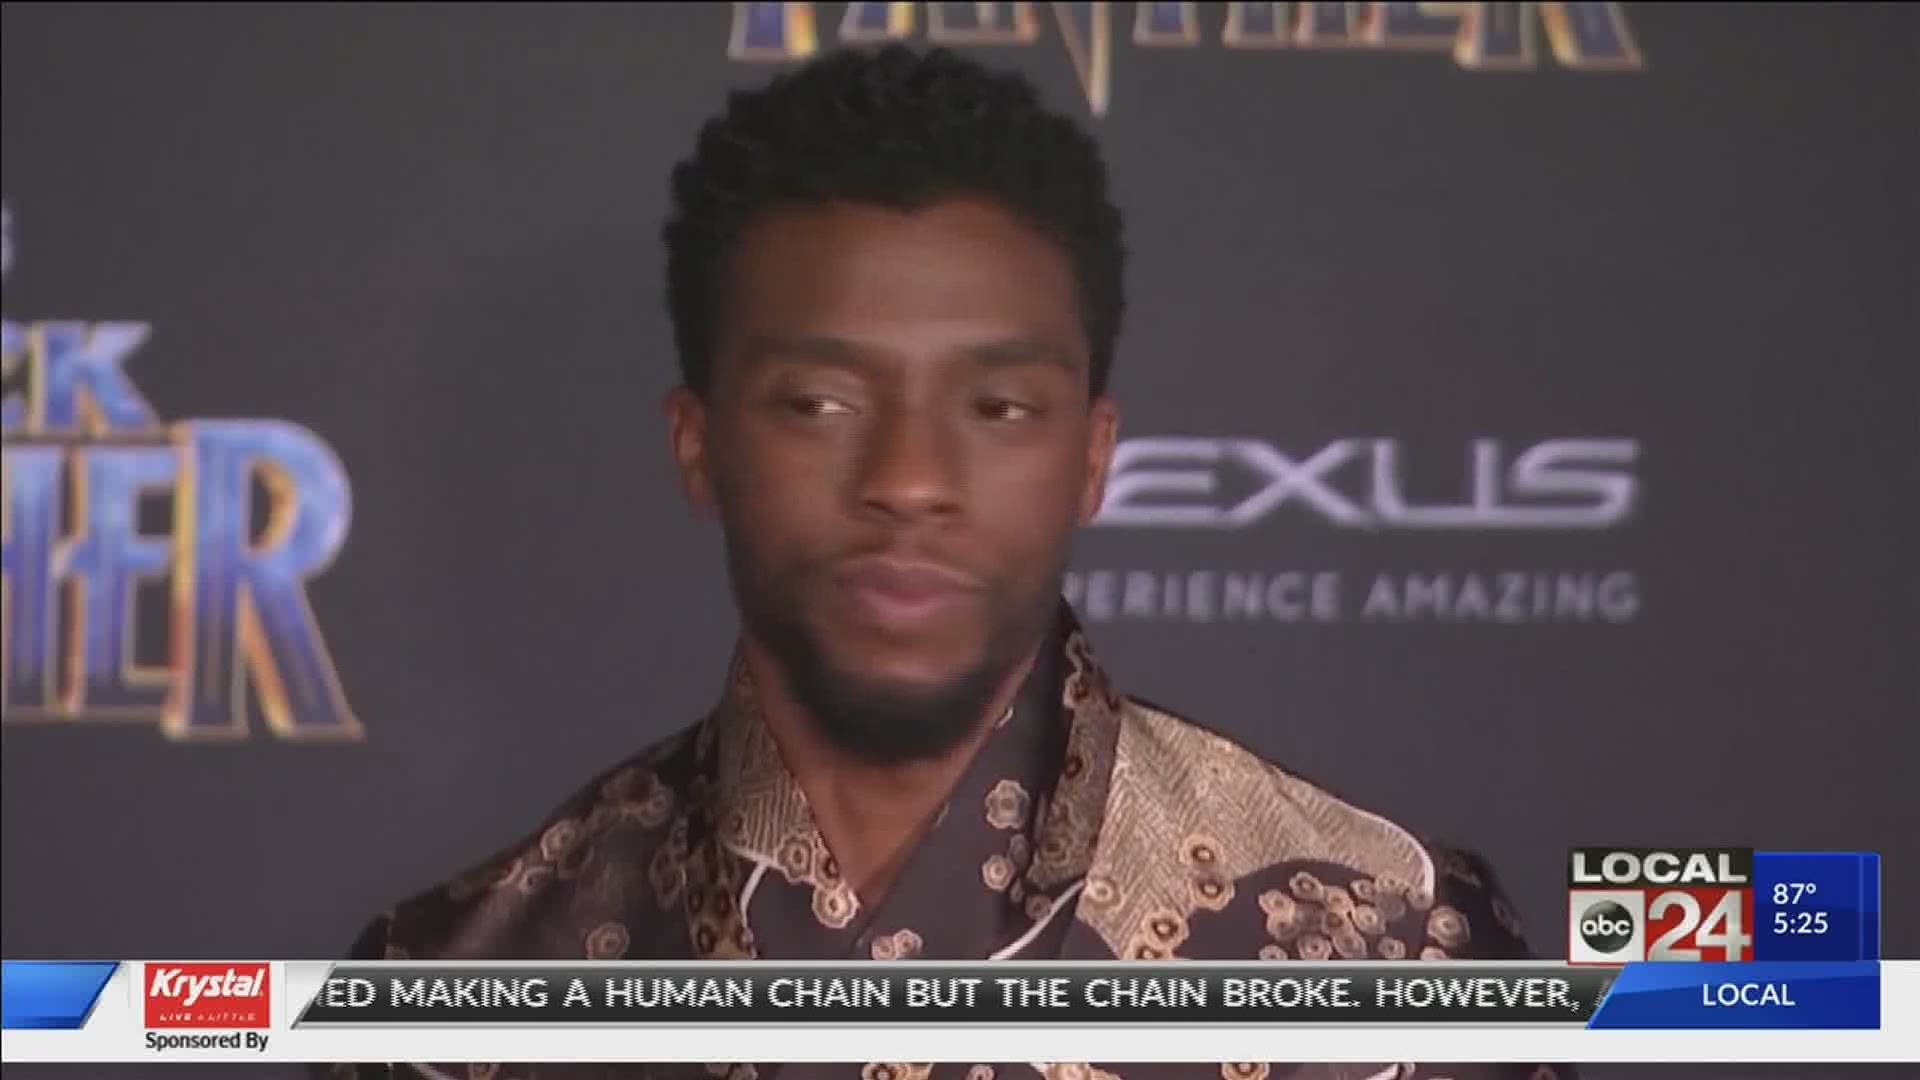 Local 24 News political analyst and commentator Otis Sanford shares his point of view on the death of Chadwick Boseman.